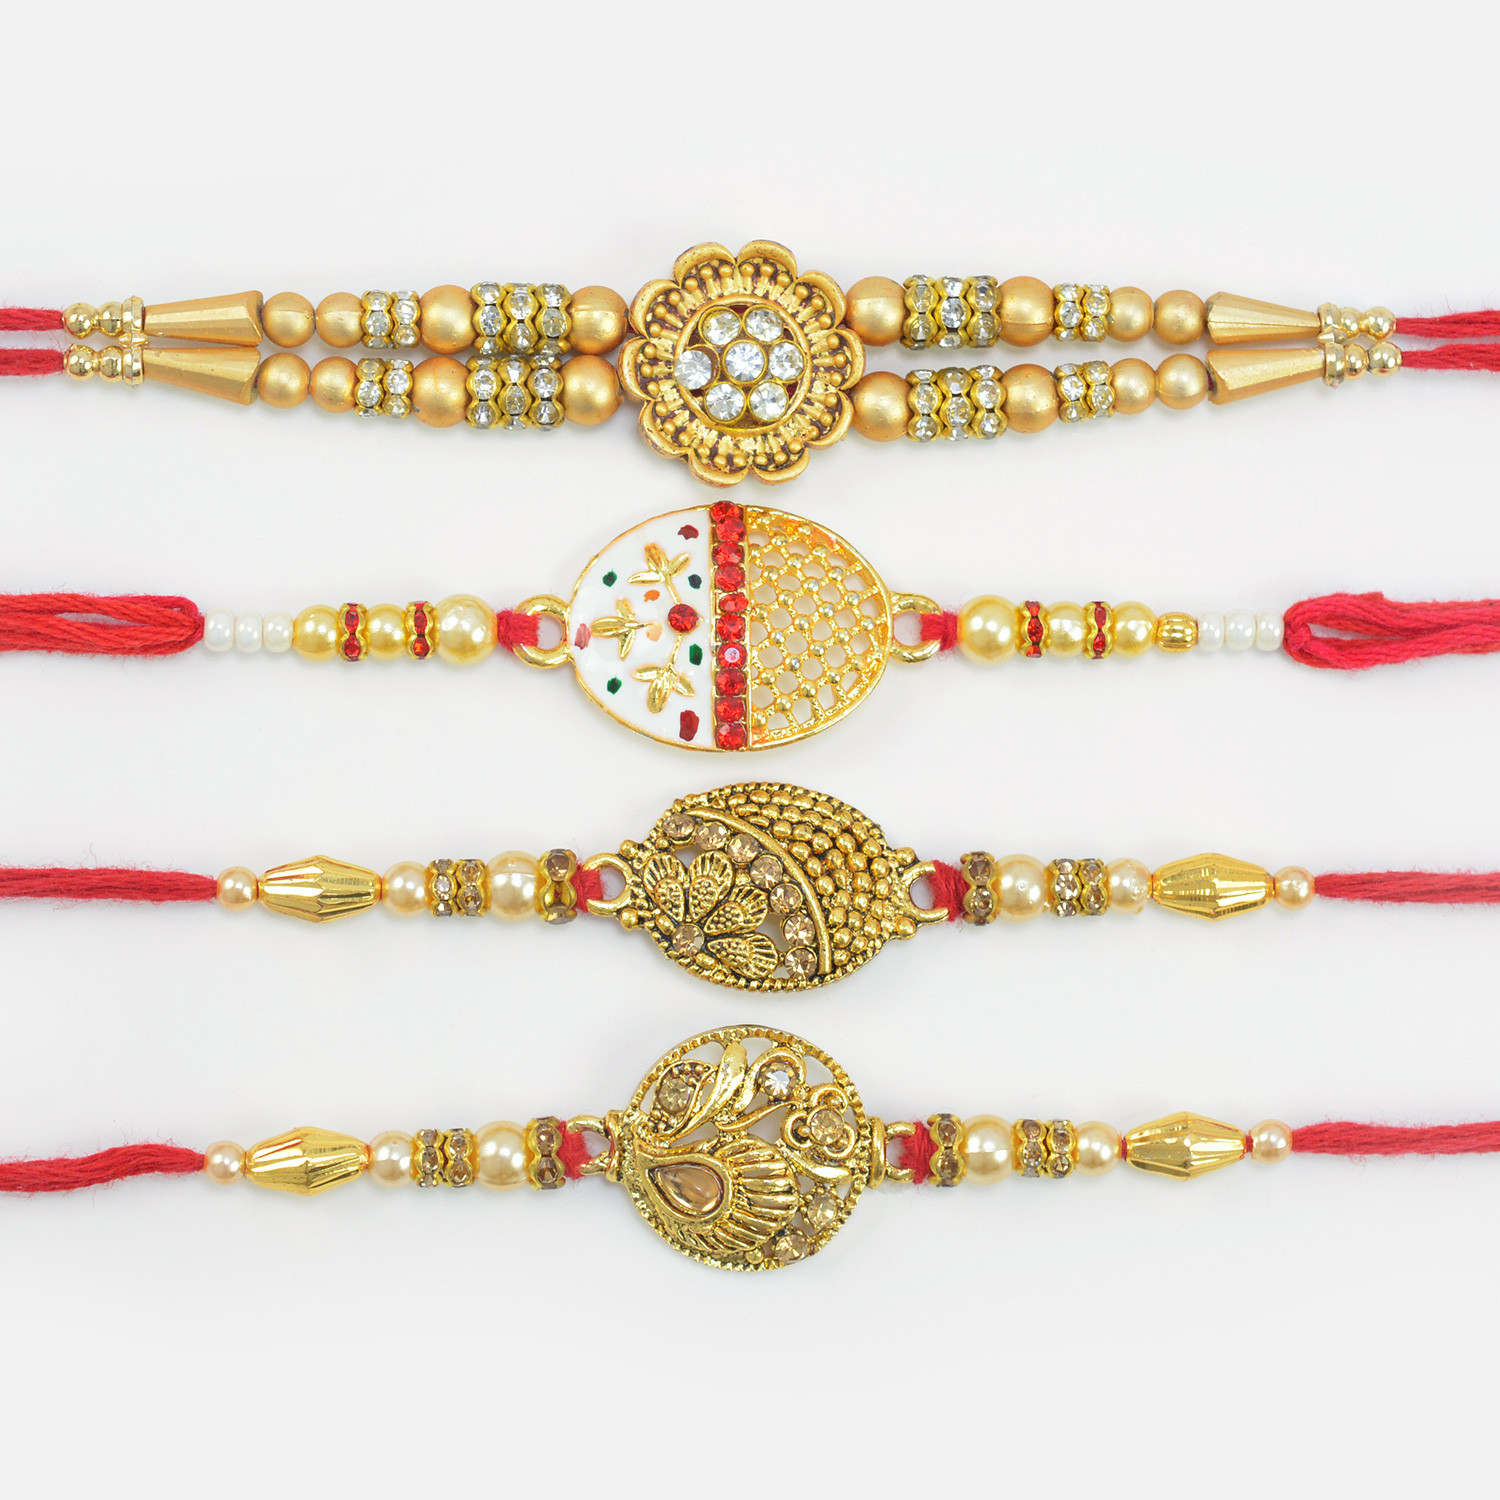 4 Fine Work Hand Crafted Special Set of Unique Brother Rakhis Set